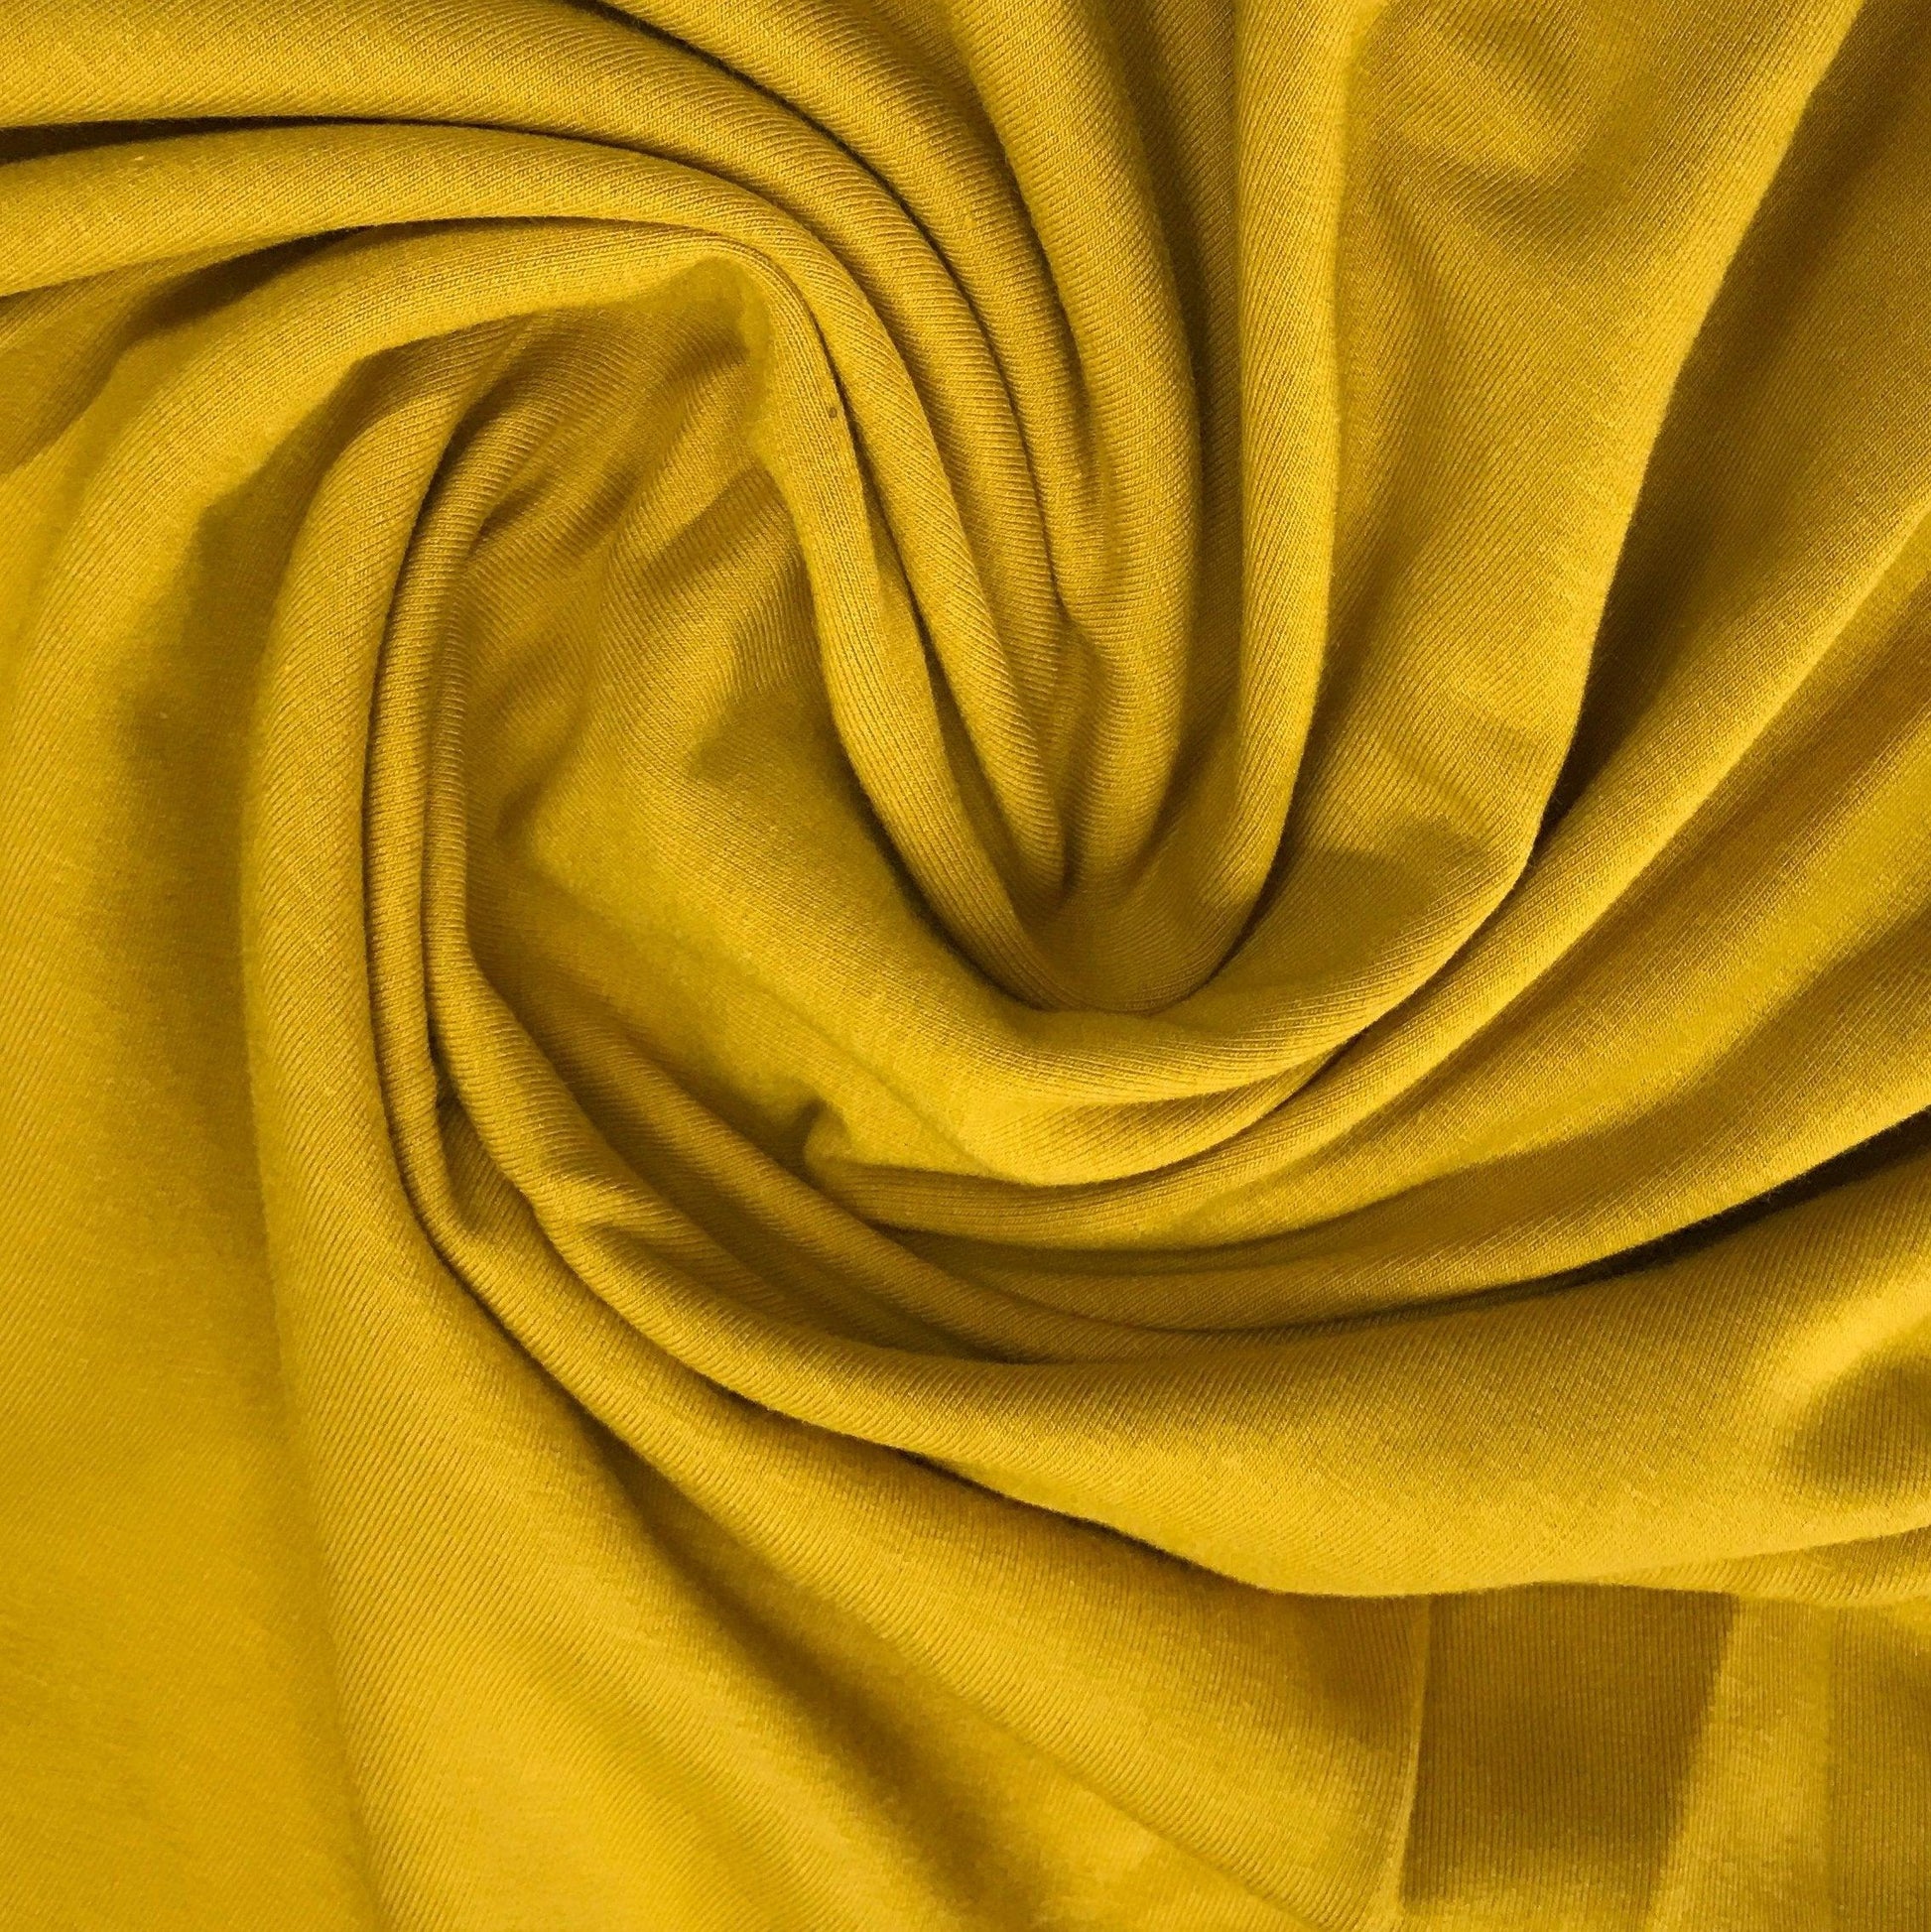 Nugget Gold Bamboo Stretch French Terry Fabric - 265 GSM, $12.86/yd, 15 Yards - Nature's Fabrics